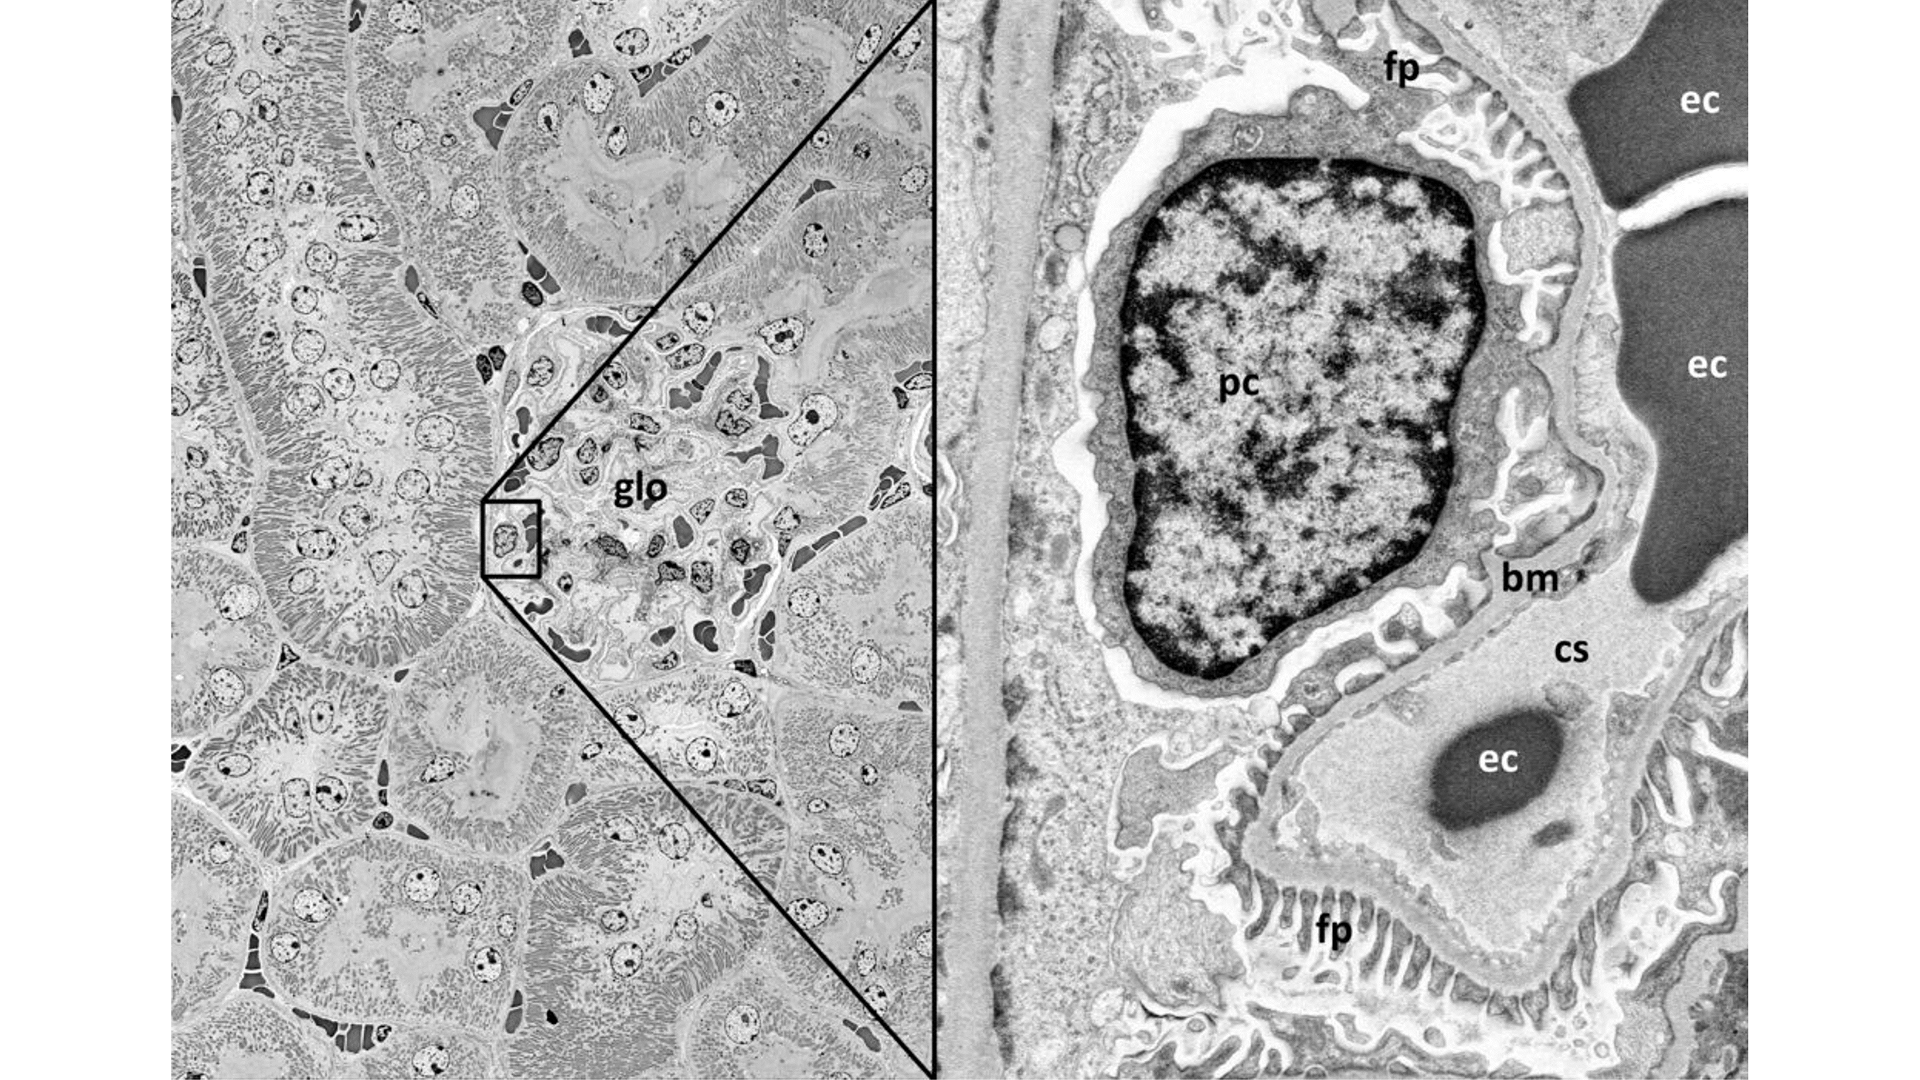 Digital zooming from kidney tissue overview into glomerulus (glo). Right side: podocyte (pc) with foot processes (fp), basement membrane (bm) and capillary space (cs) with erythrocystes (ec). Imaged with ZEISS GeminiSEM.